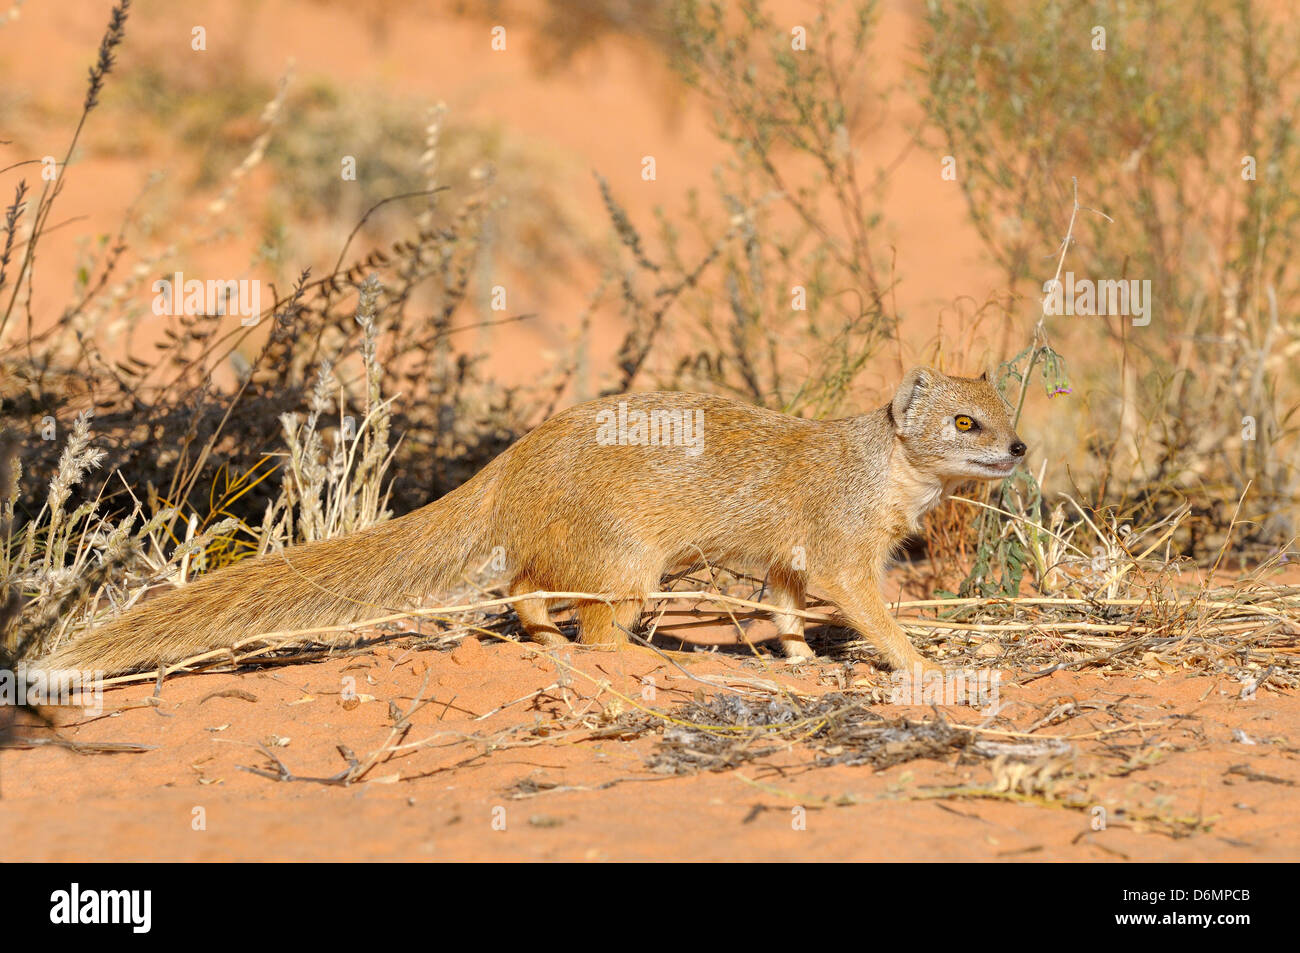 Yellow Mongoose Cynictis penicillata Photographed in Kgalagadi National Park, South Africa Stock Photo